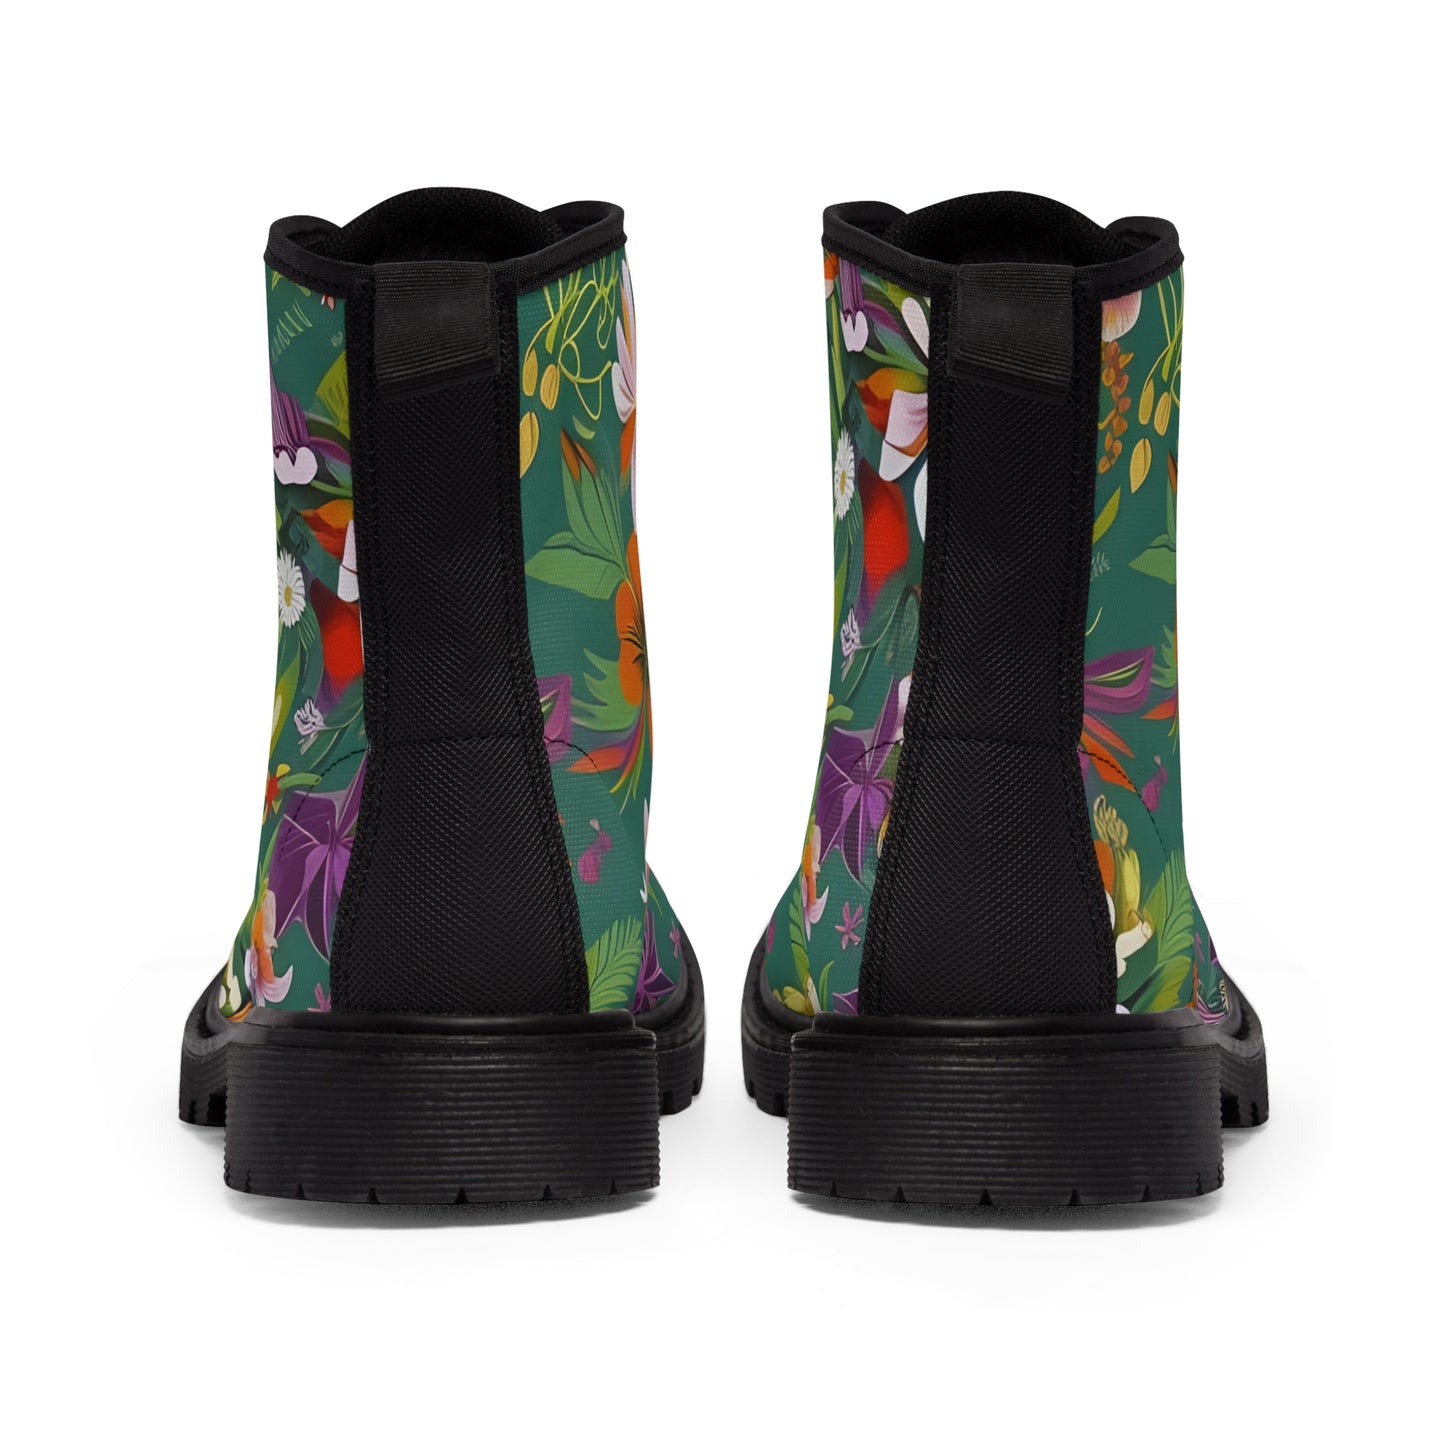 Floral Vibes Limited EDition Women's Canvas Boots